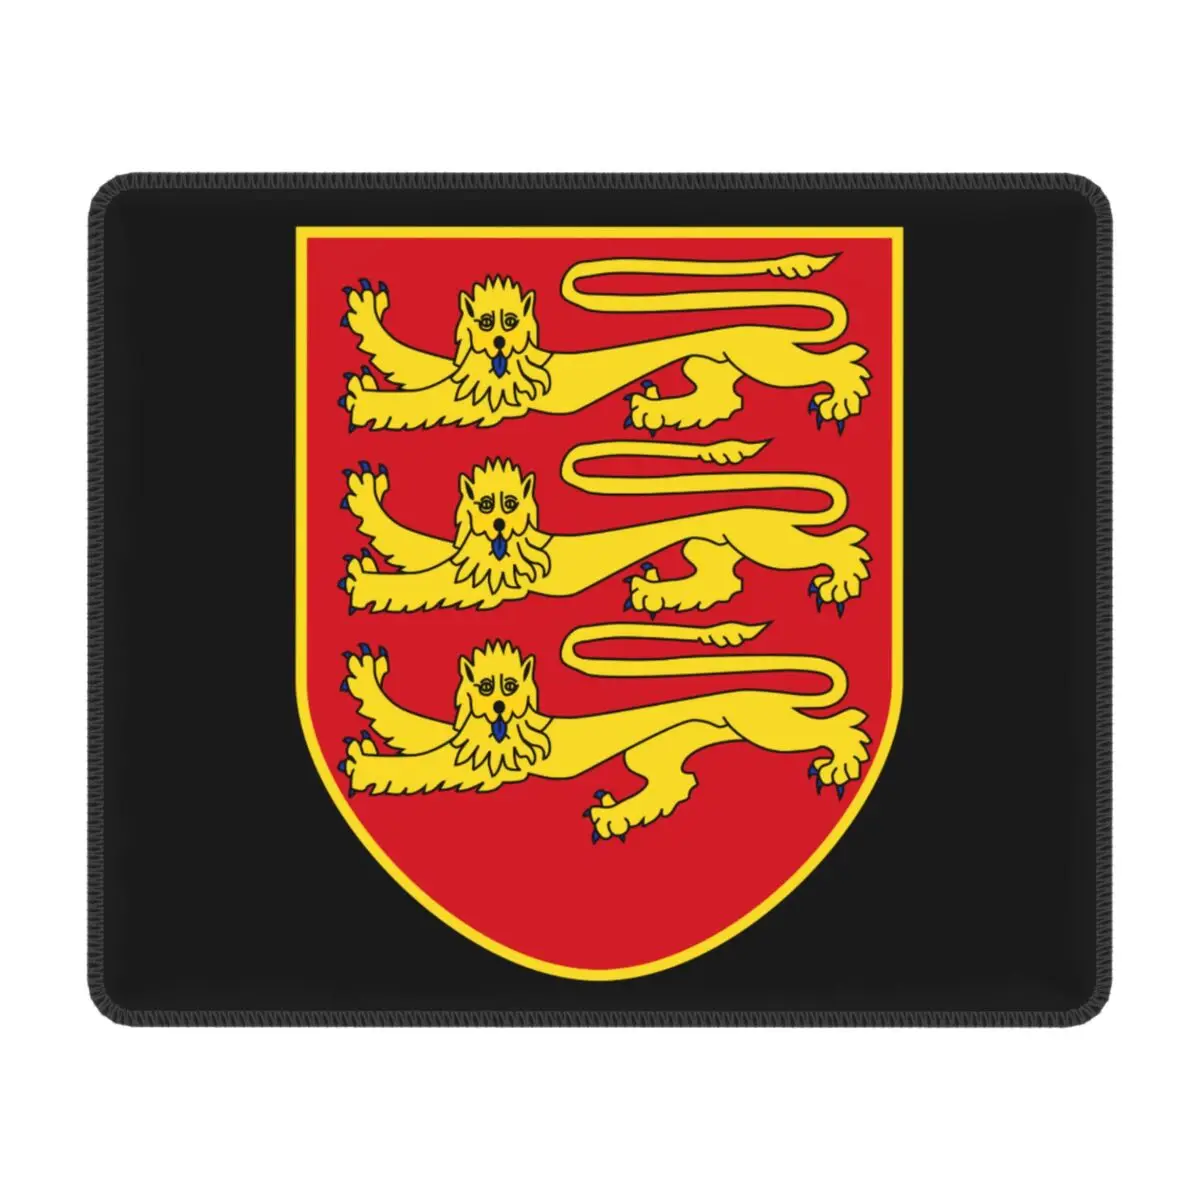 

Coat Of Arms Of Jersey Mouse Pad Non-Slip Rubber Mousepad with Durable Stitched Edges for Gaming Laptop Computer PC Mouse Mat